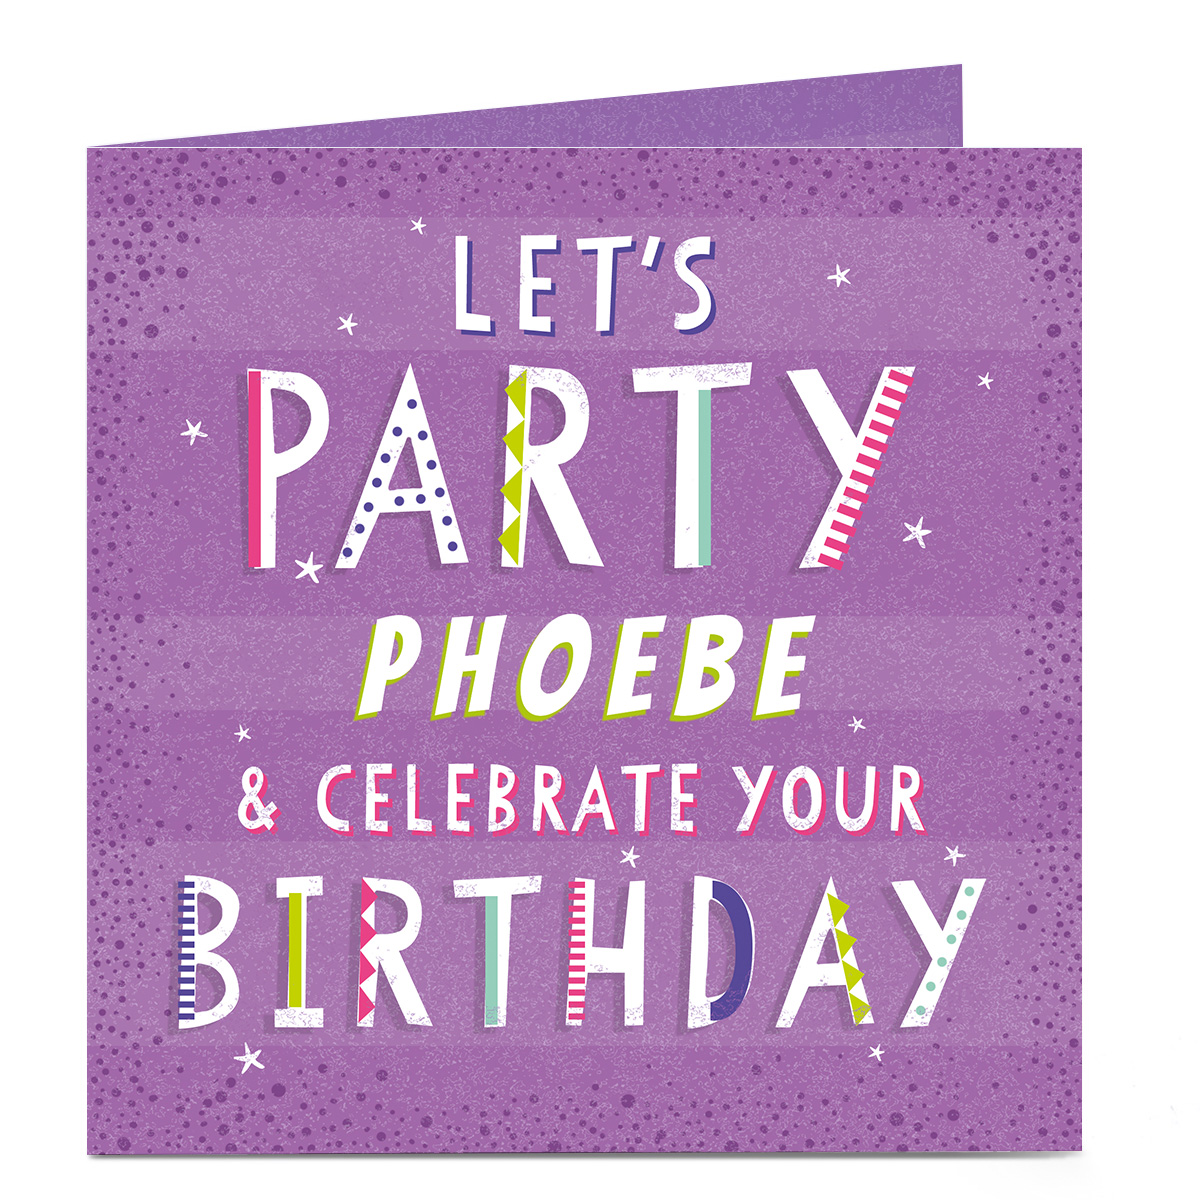 Personalised Birthday Card - Lets Party [Any Name]